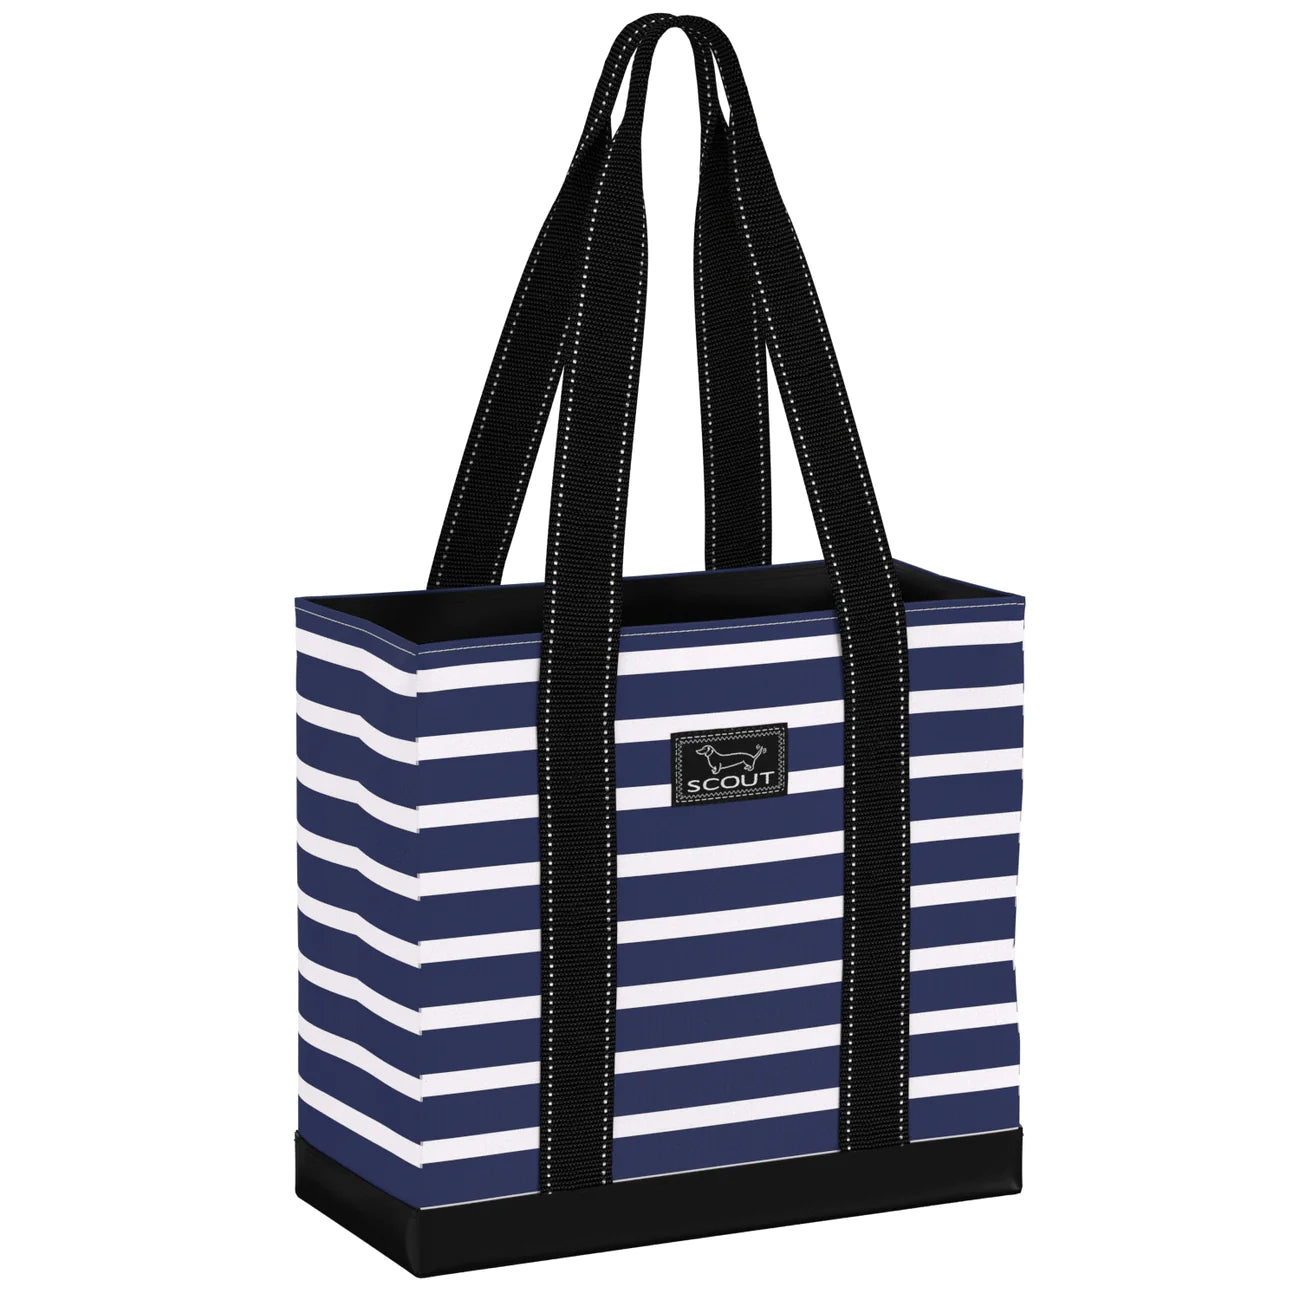 Nantucket Navy Original Deano Tote Bag by Scout